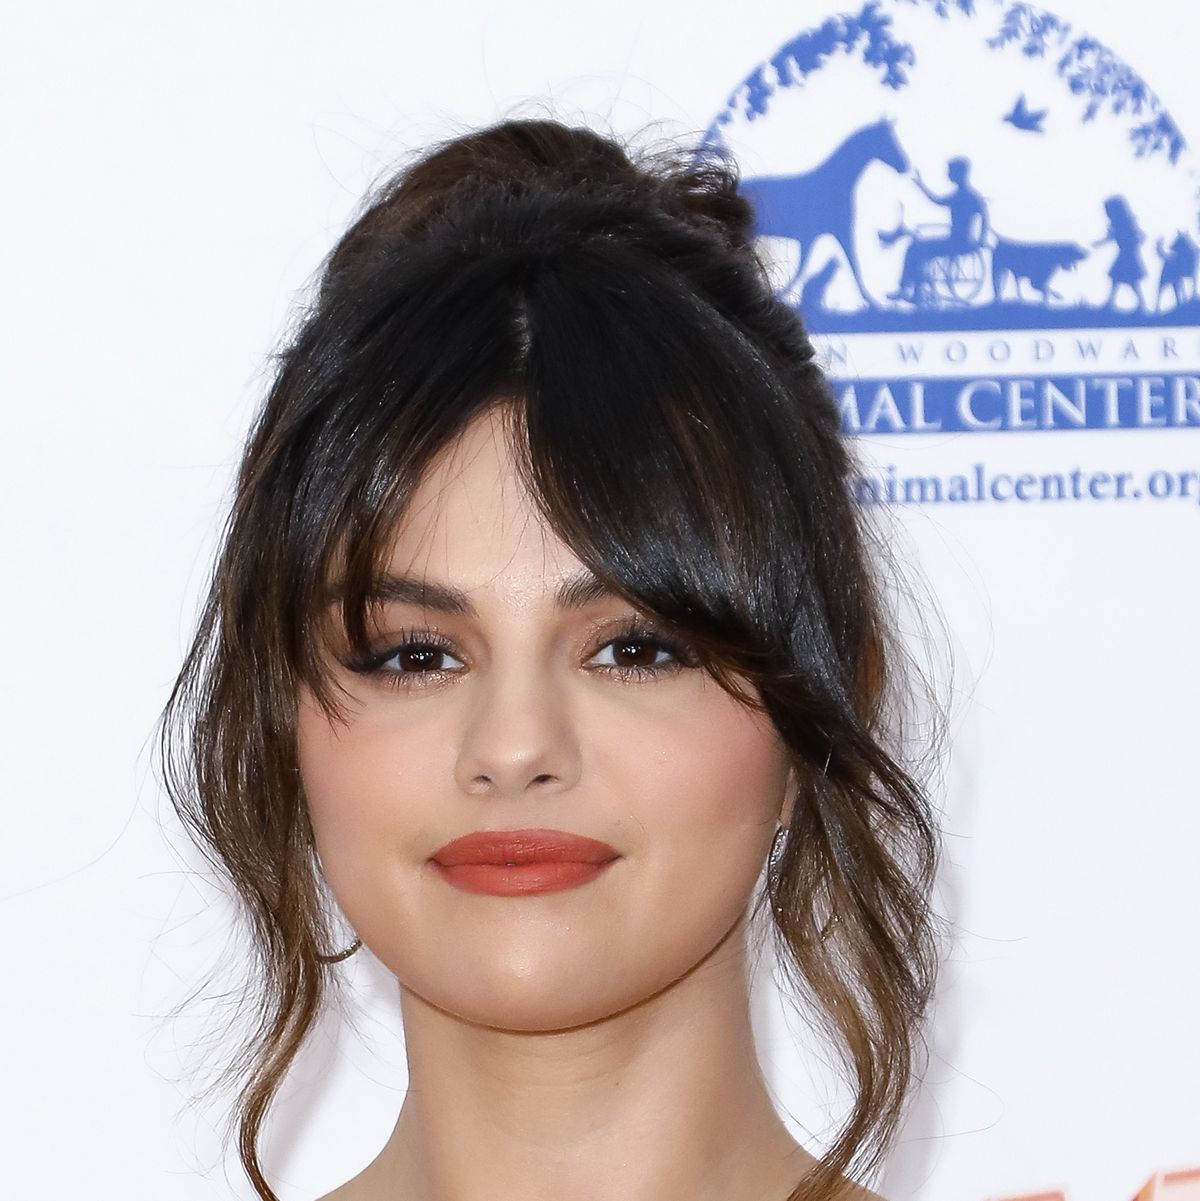 Selena Gomez Tried To Solve A 38-Year-Old Cold Case Murder